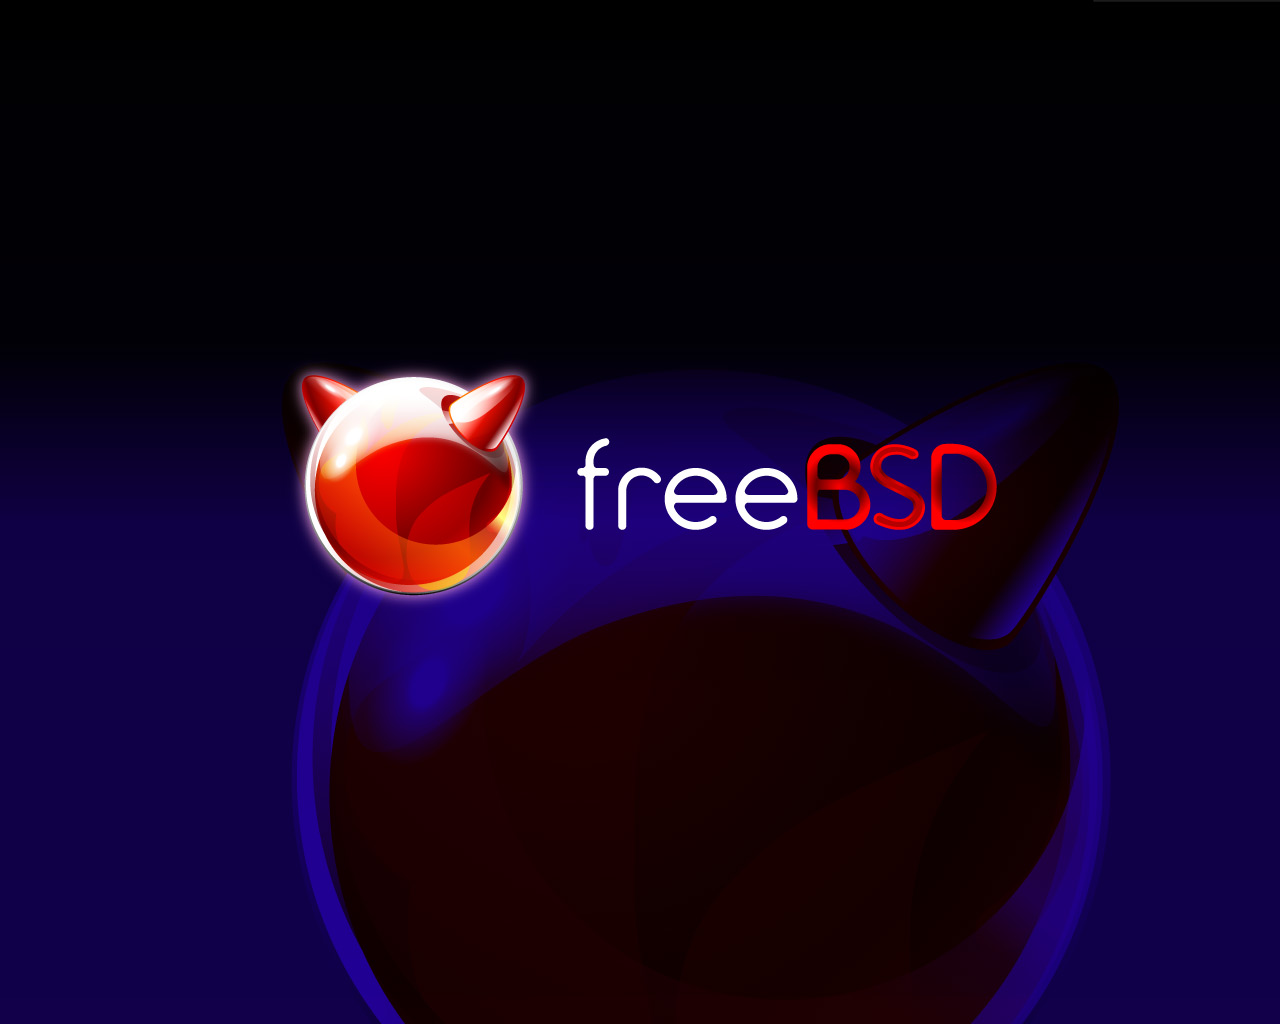 freebsd vmware image